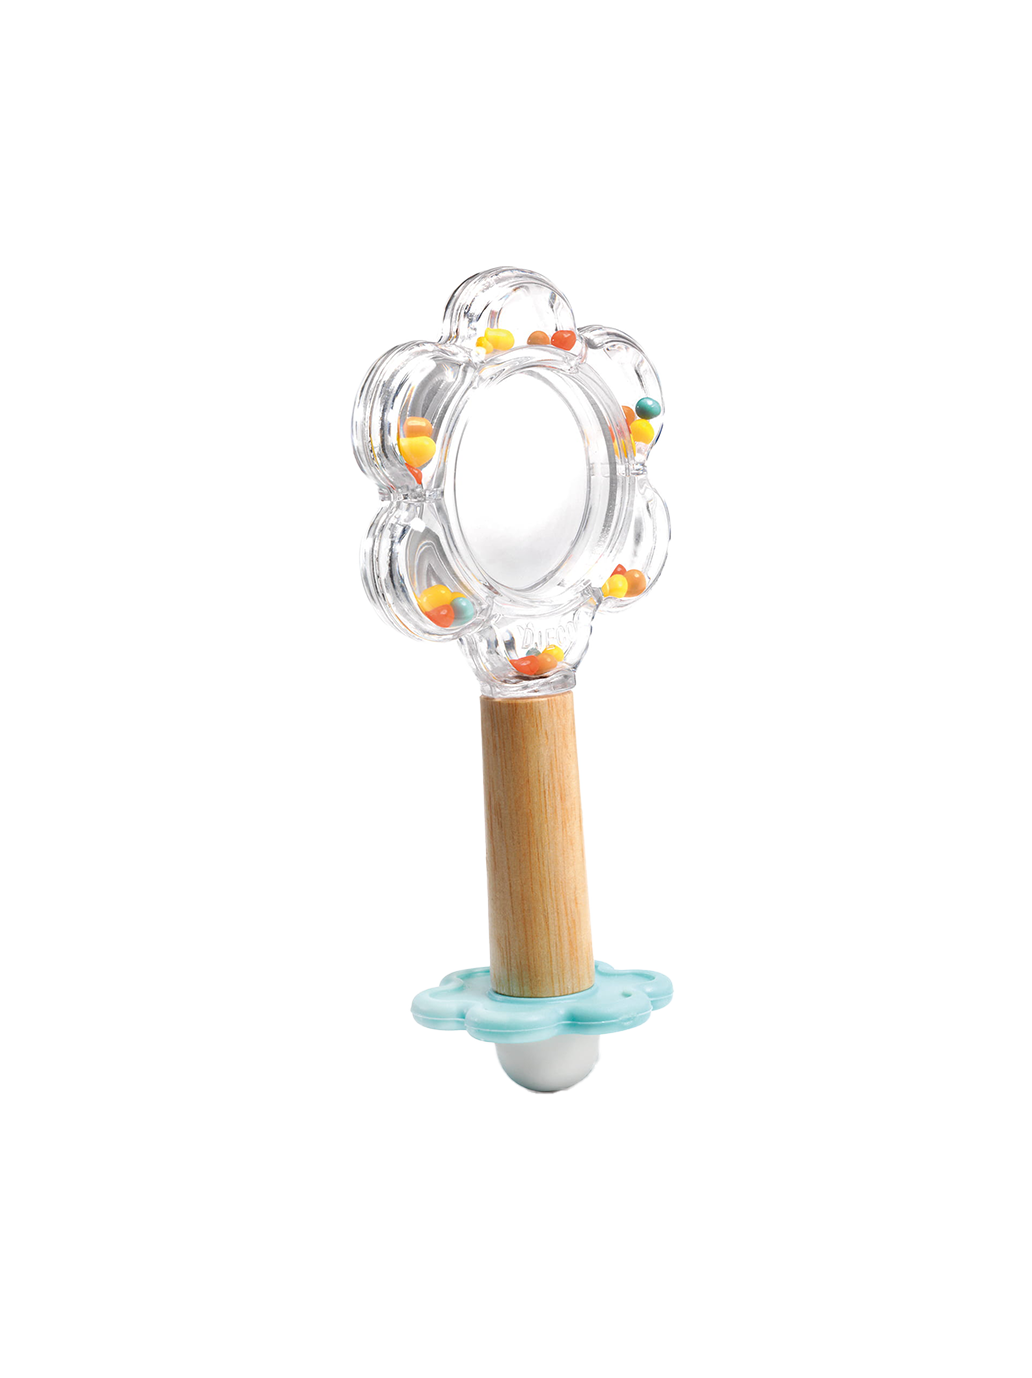 Baby Flower rattle with mirror